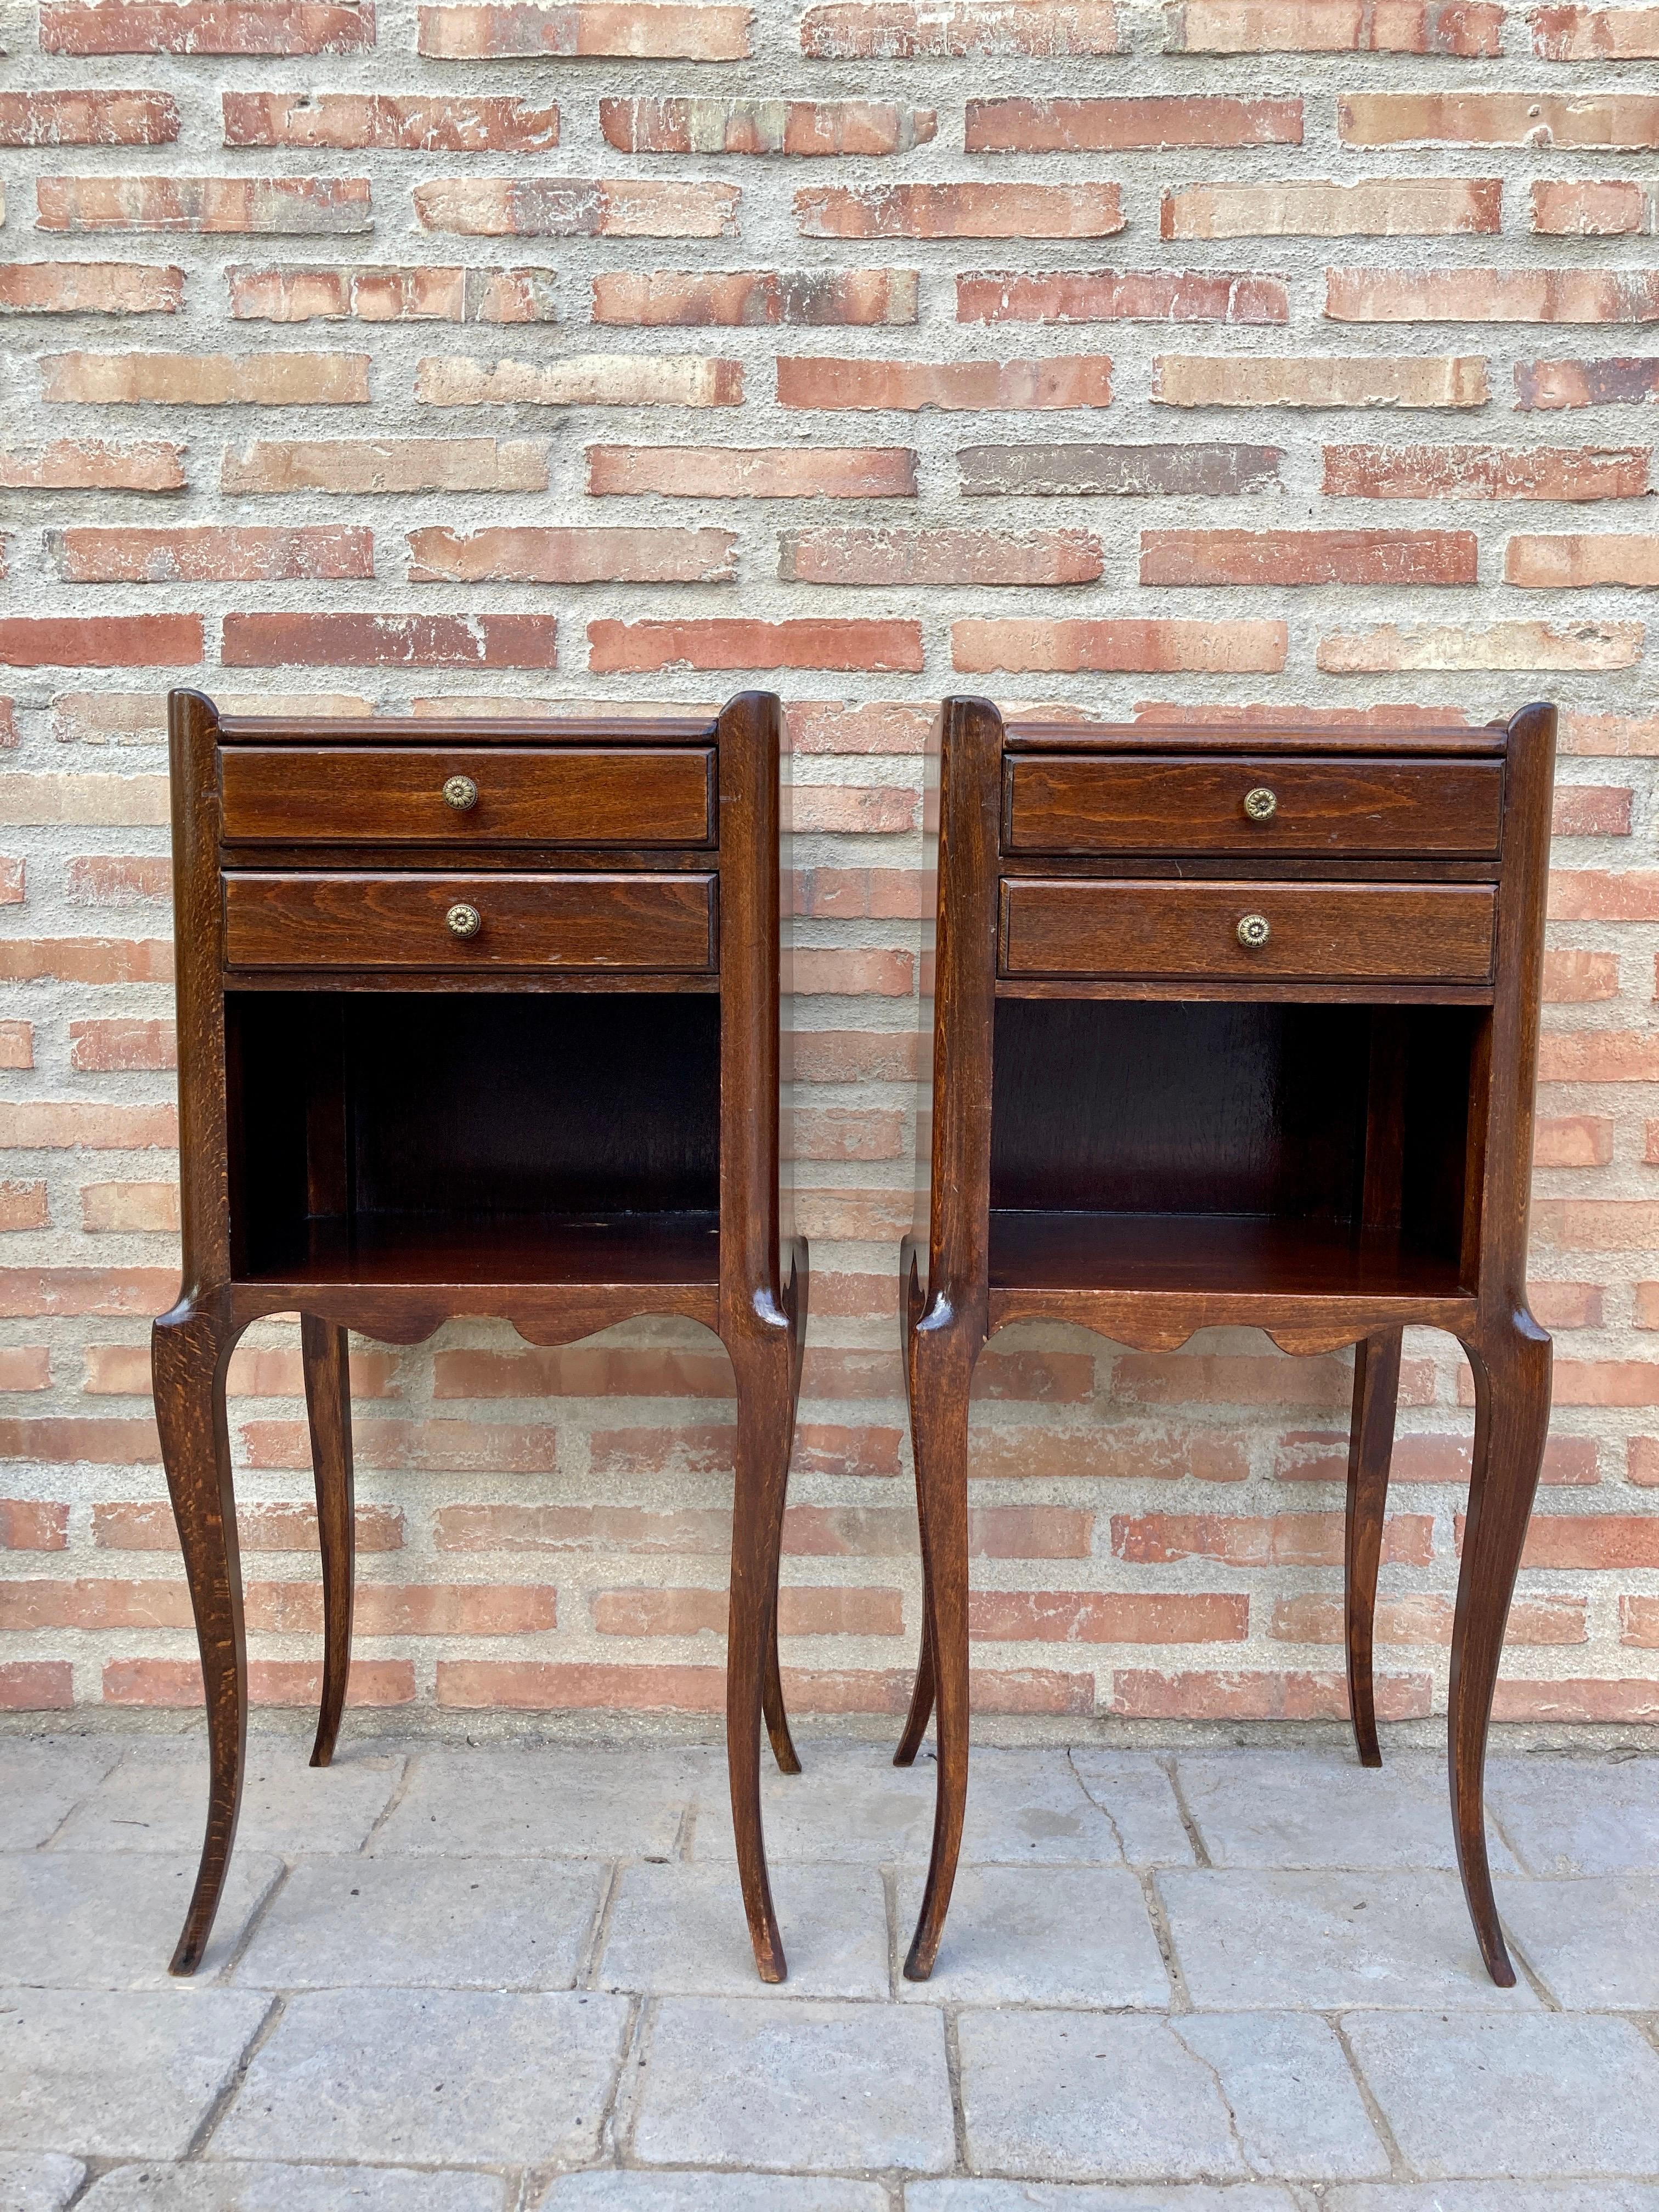 Elegant pair of coffee tables or bedside tables in antique Louis XV style from the 1890s, rare and fine in oak wood. This pair of nightstands have particularly thin legs. In the front they have two comfortable drawers and an open shelf. Pair of